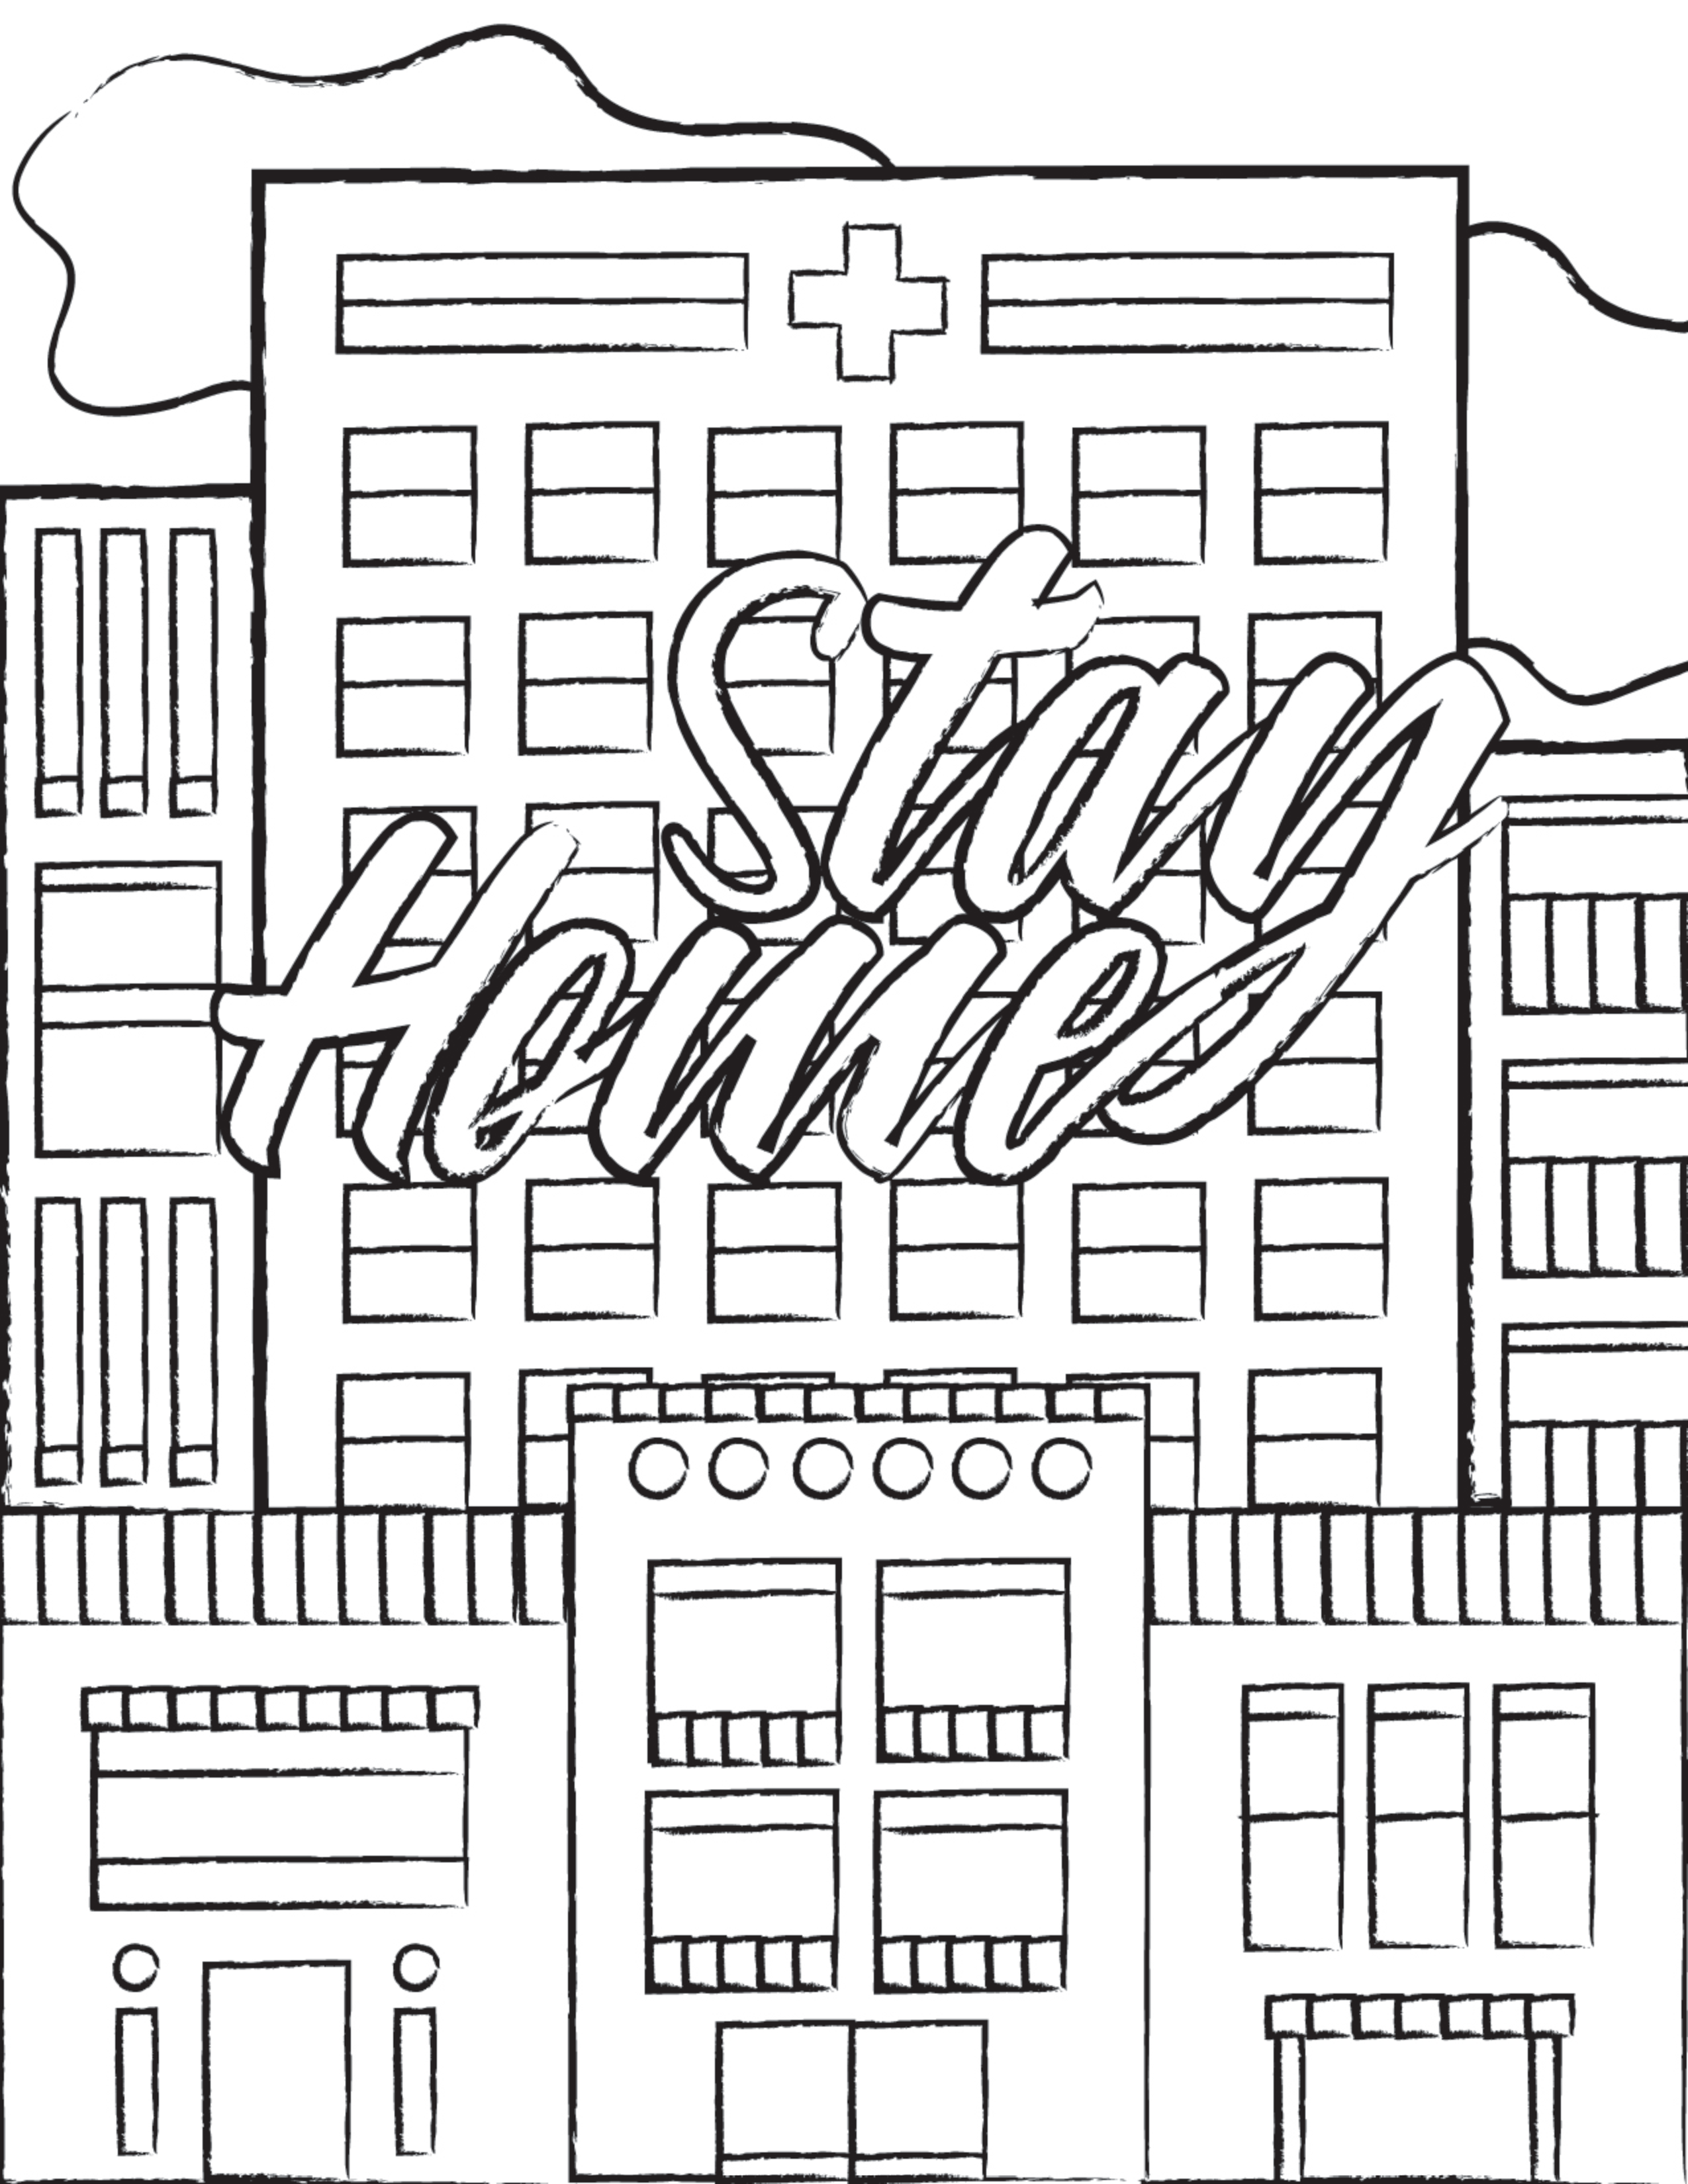 Free Quarantine Coloring Pages for COVID-19 printable